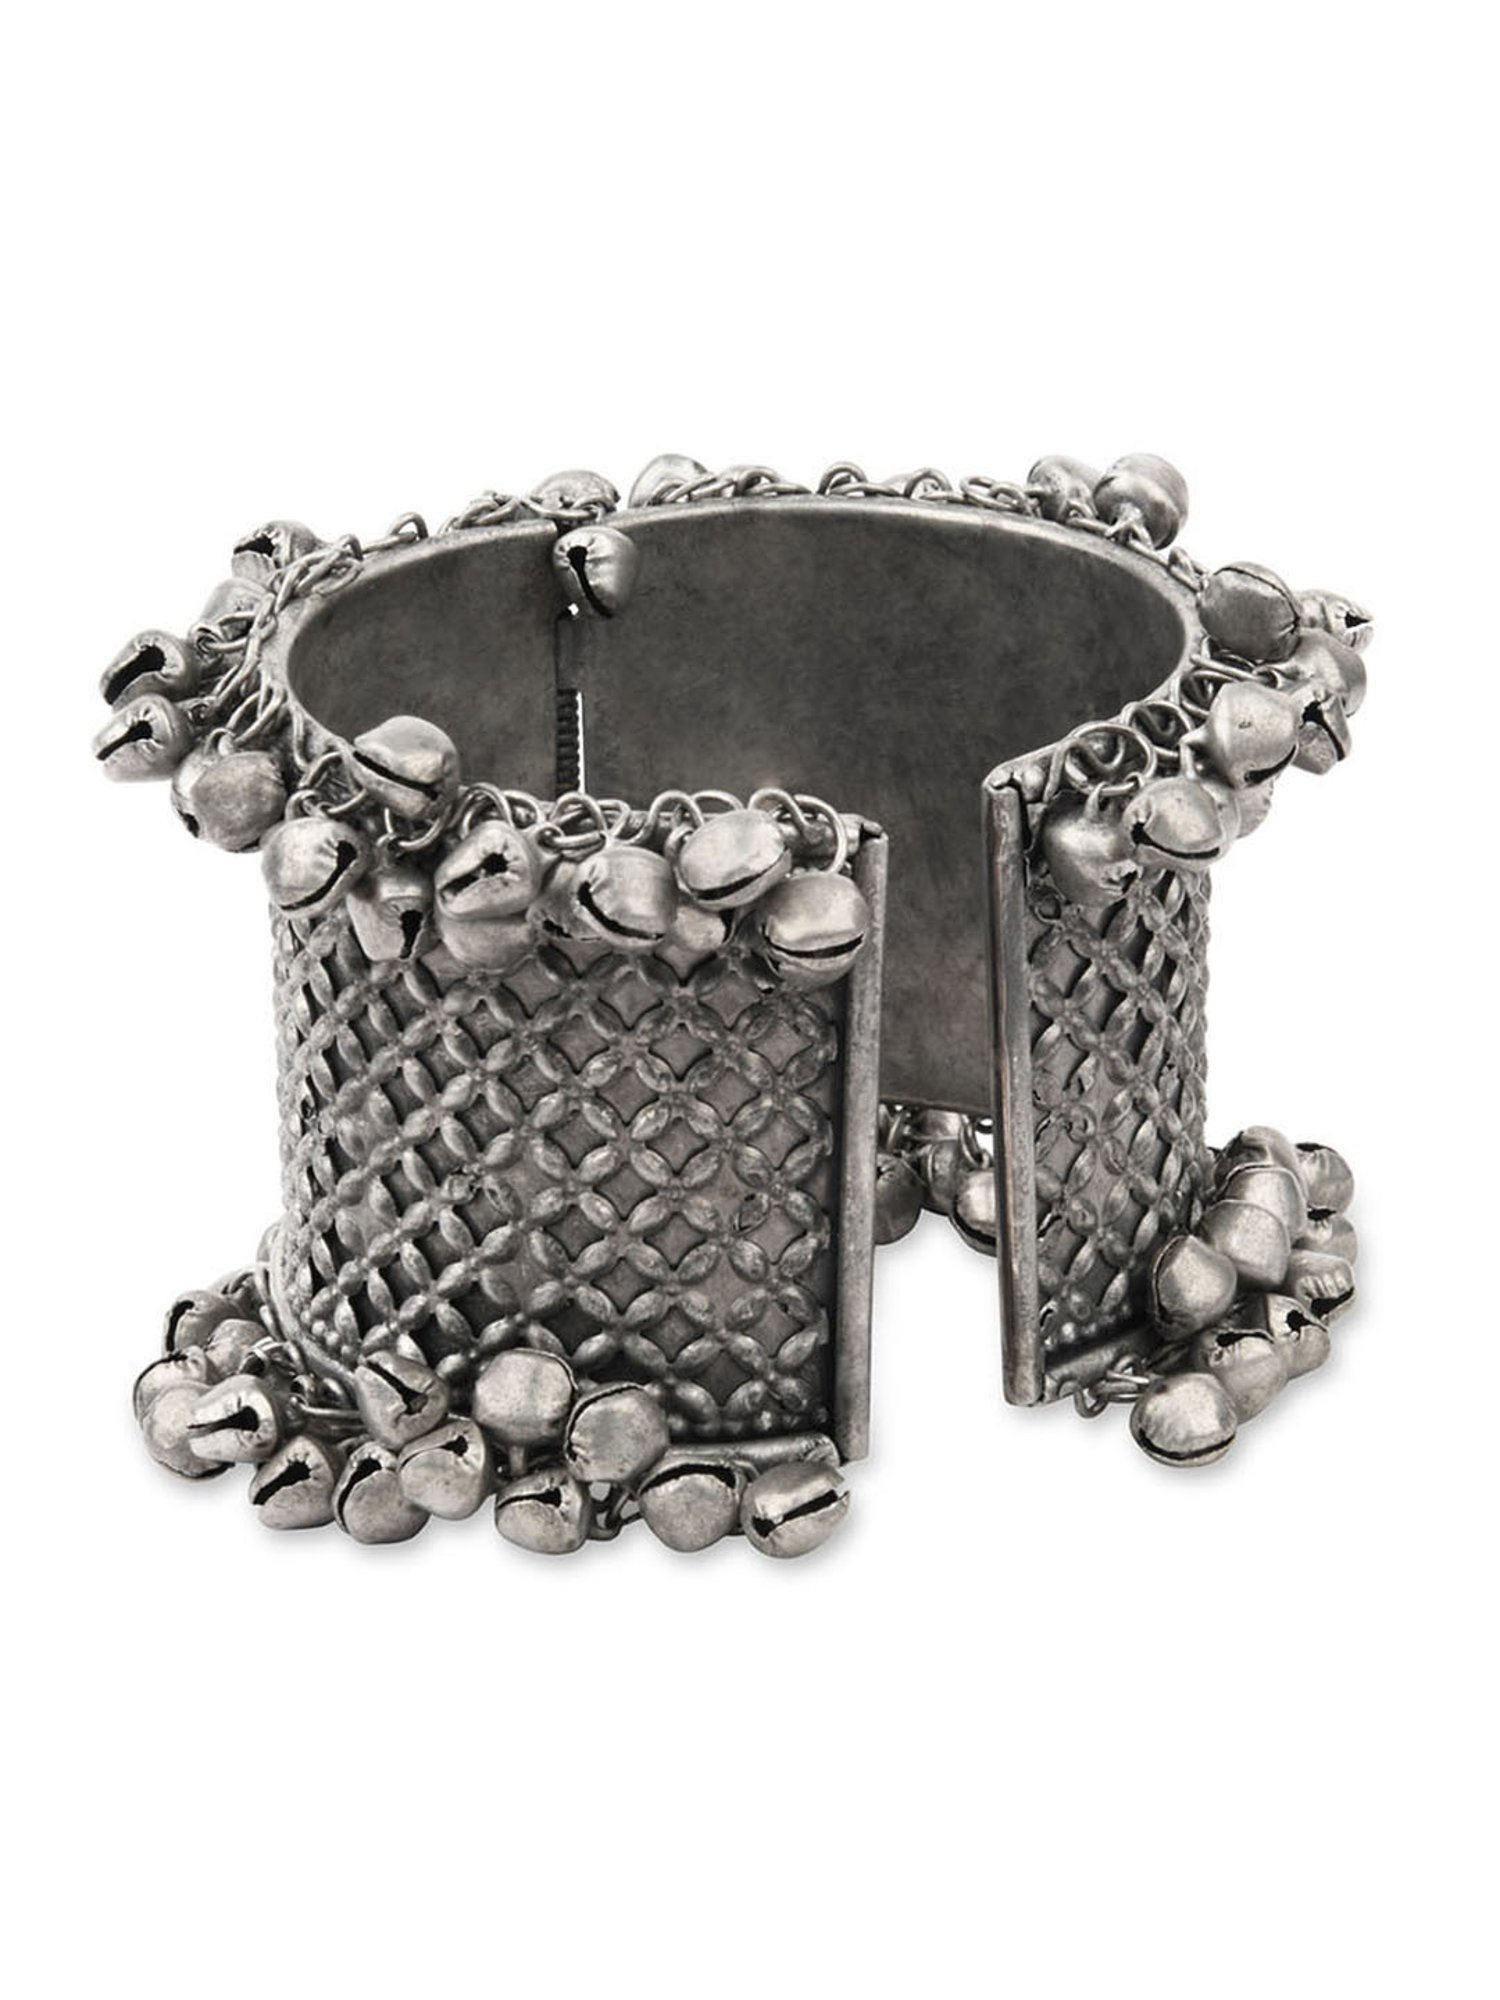 South Indian silver bracelet - ethnicadornment